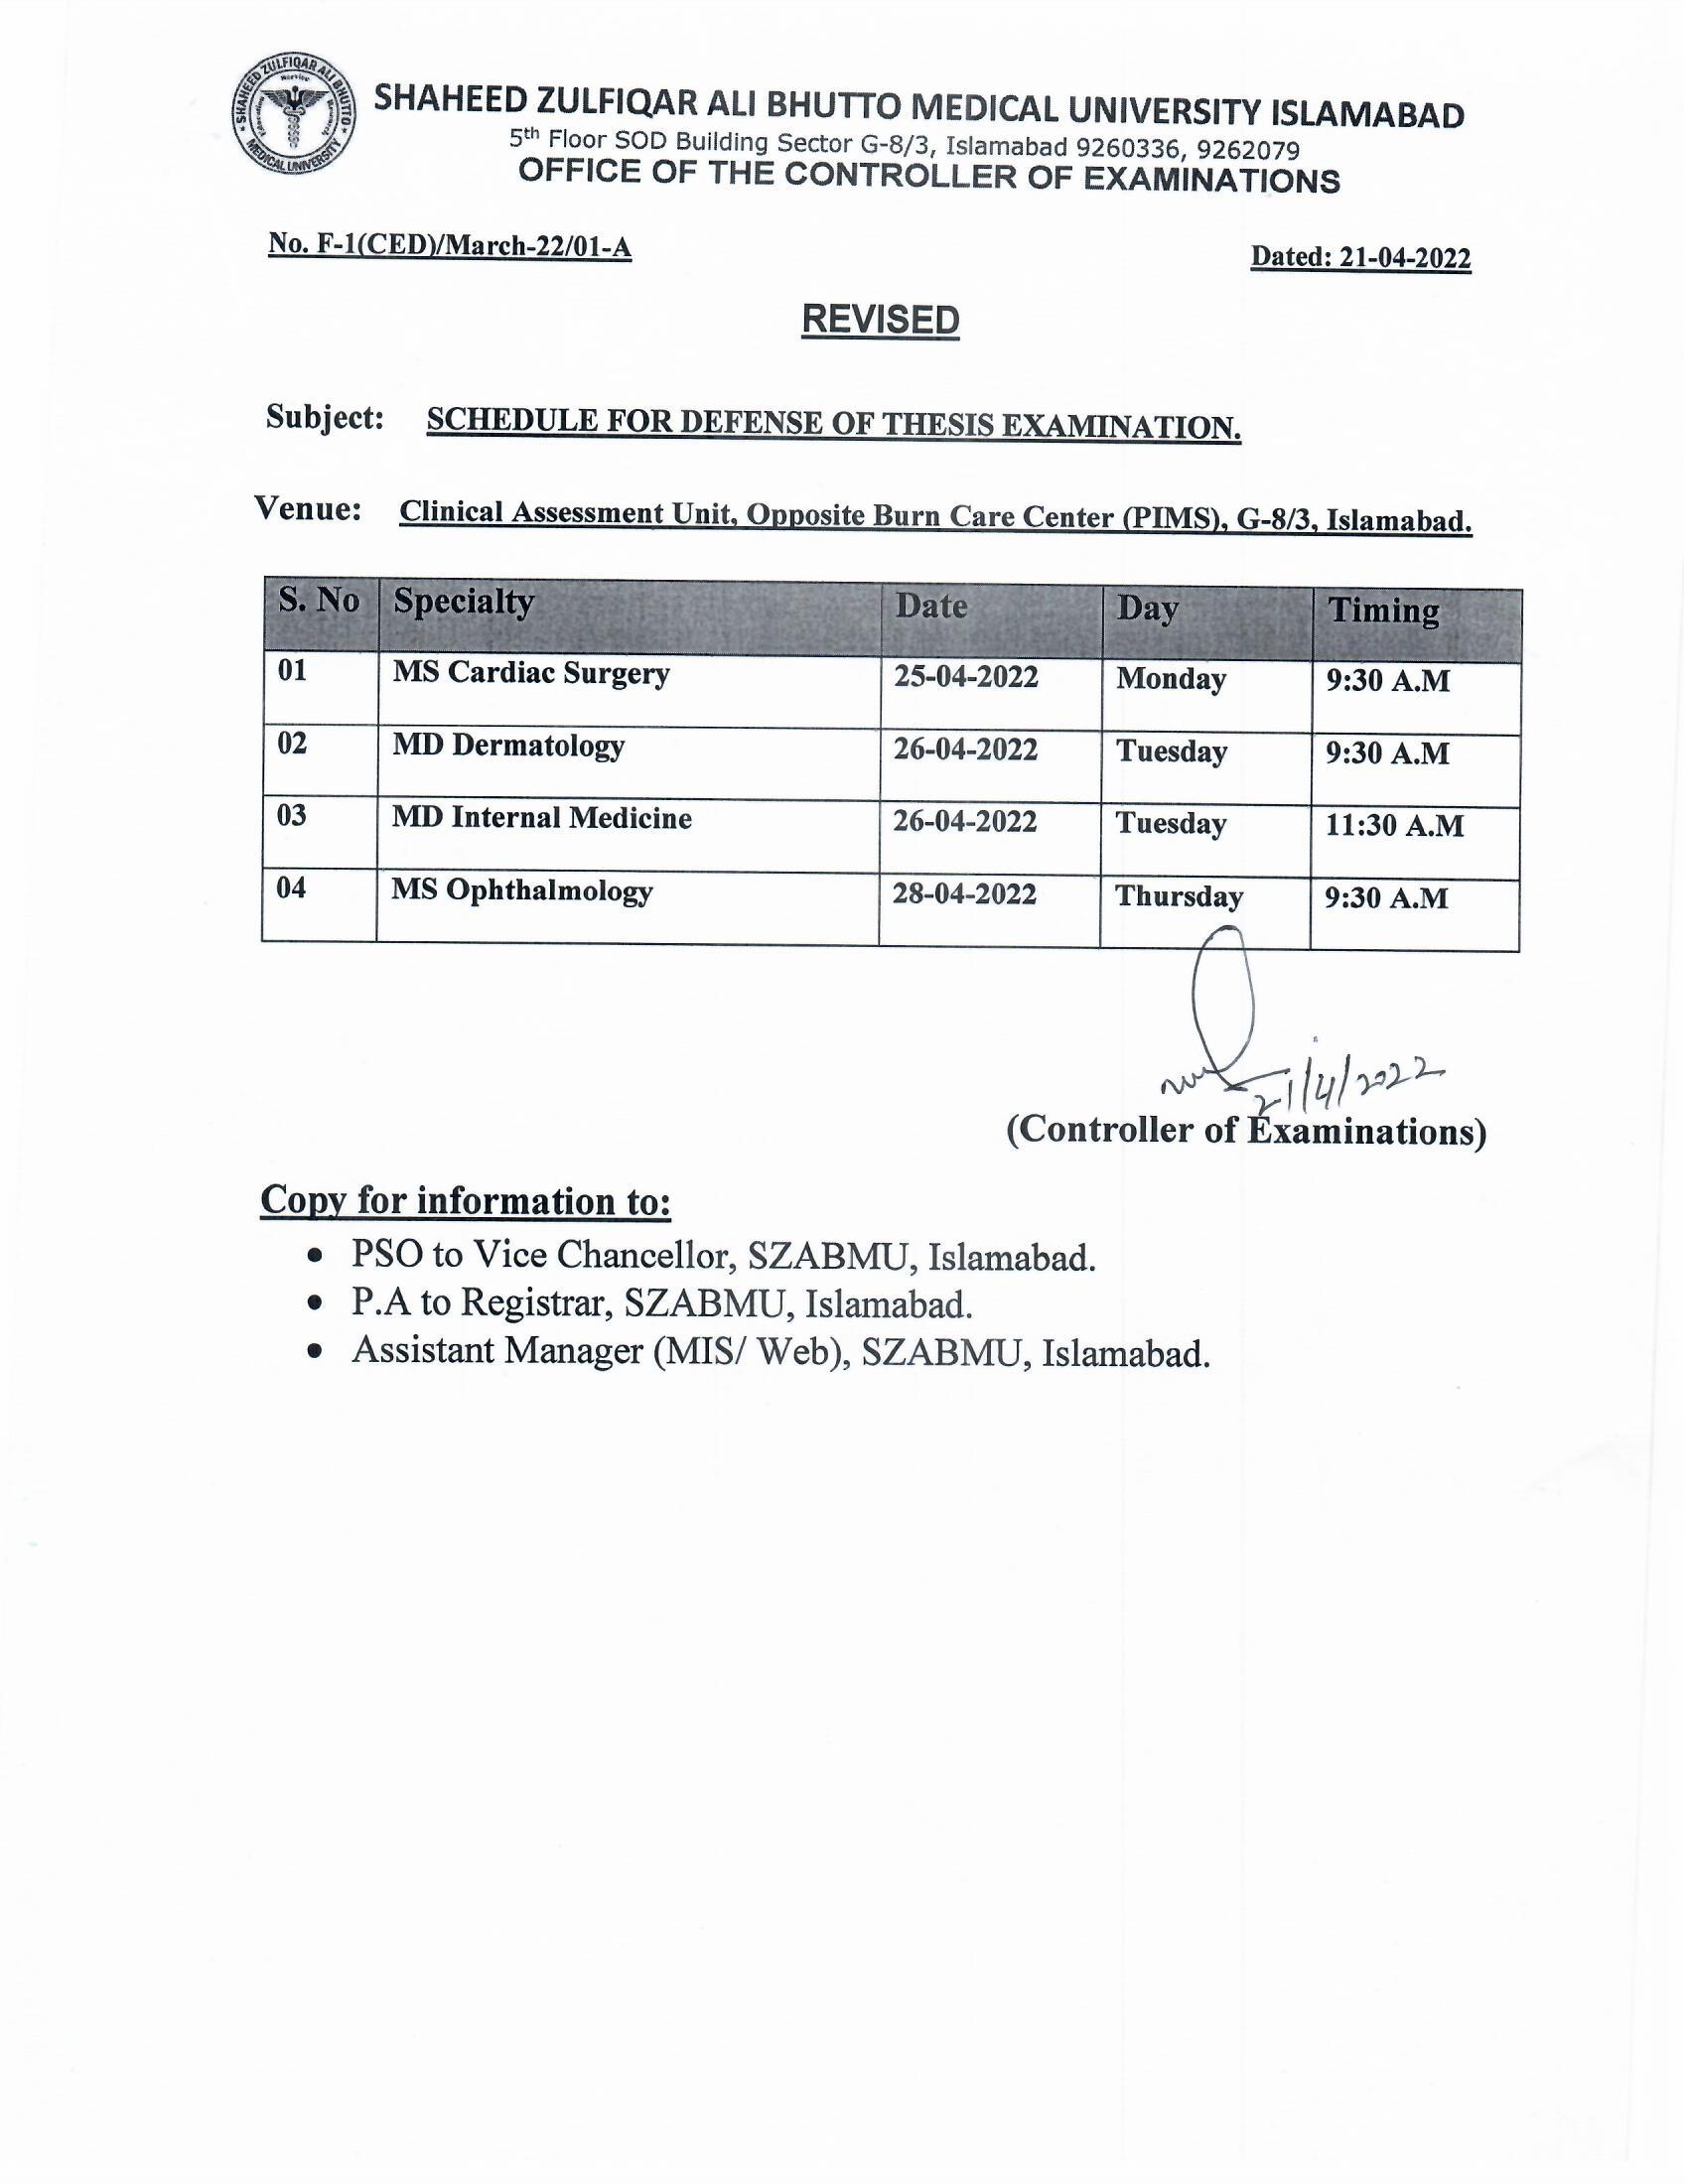 Revised Schedule for Defense of Thesis Examination